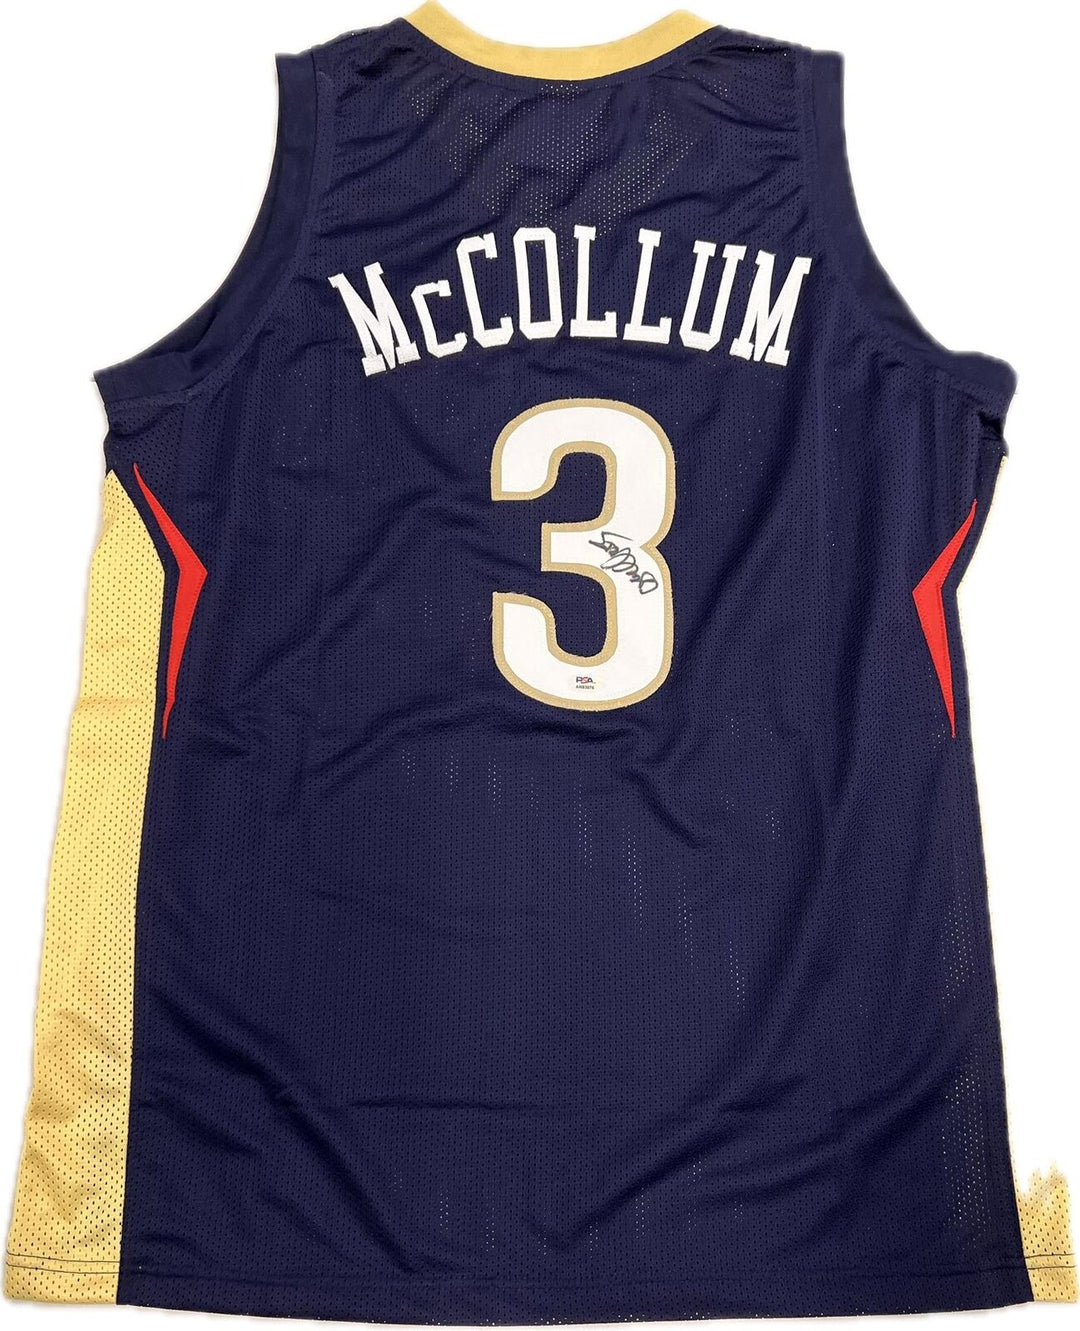 CJ McCollum signed jersey PSA/DNA New Orleans Pelicans Autographed Image 1